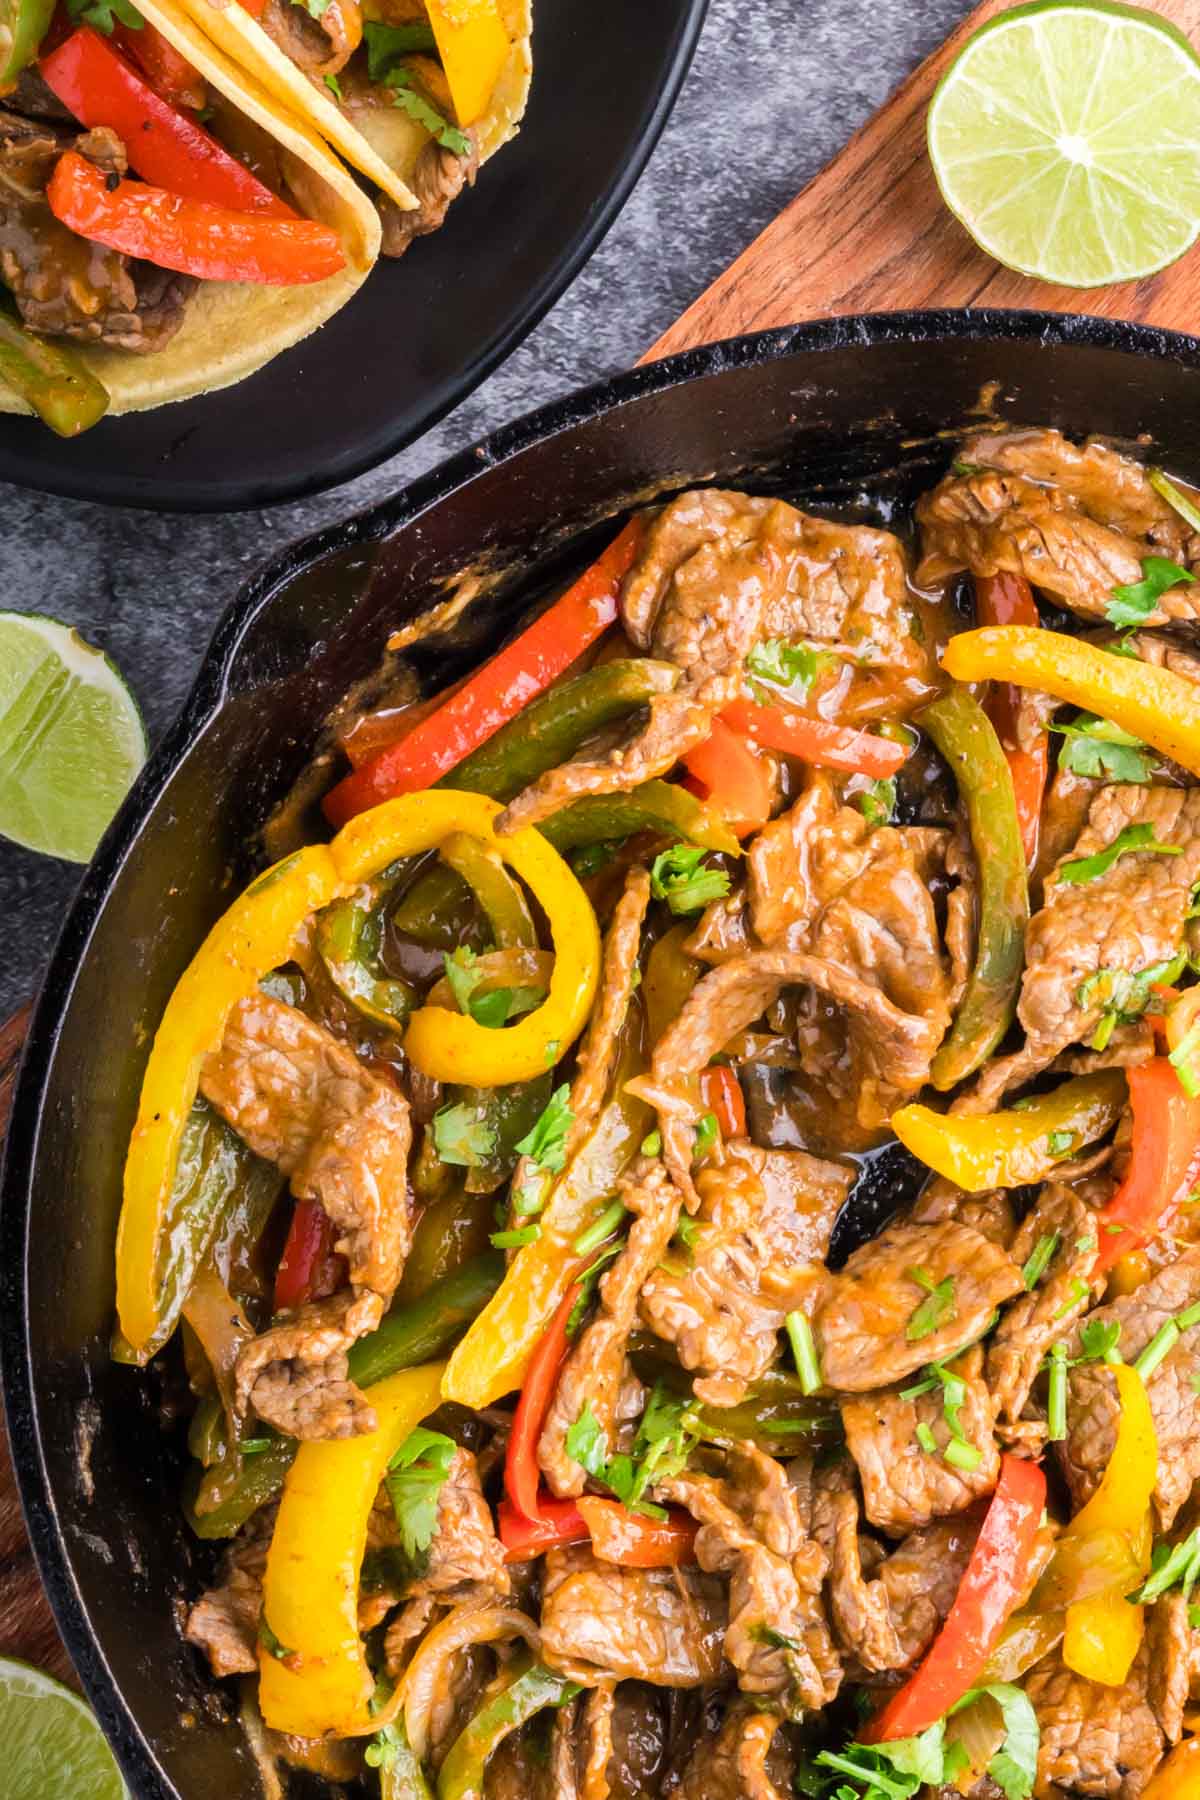 Steak, peppers and onions cooked in fajita seasoning in a skillet.